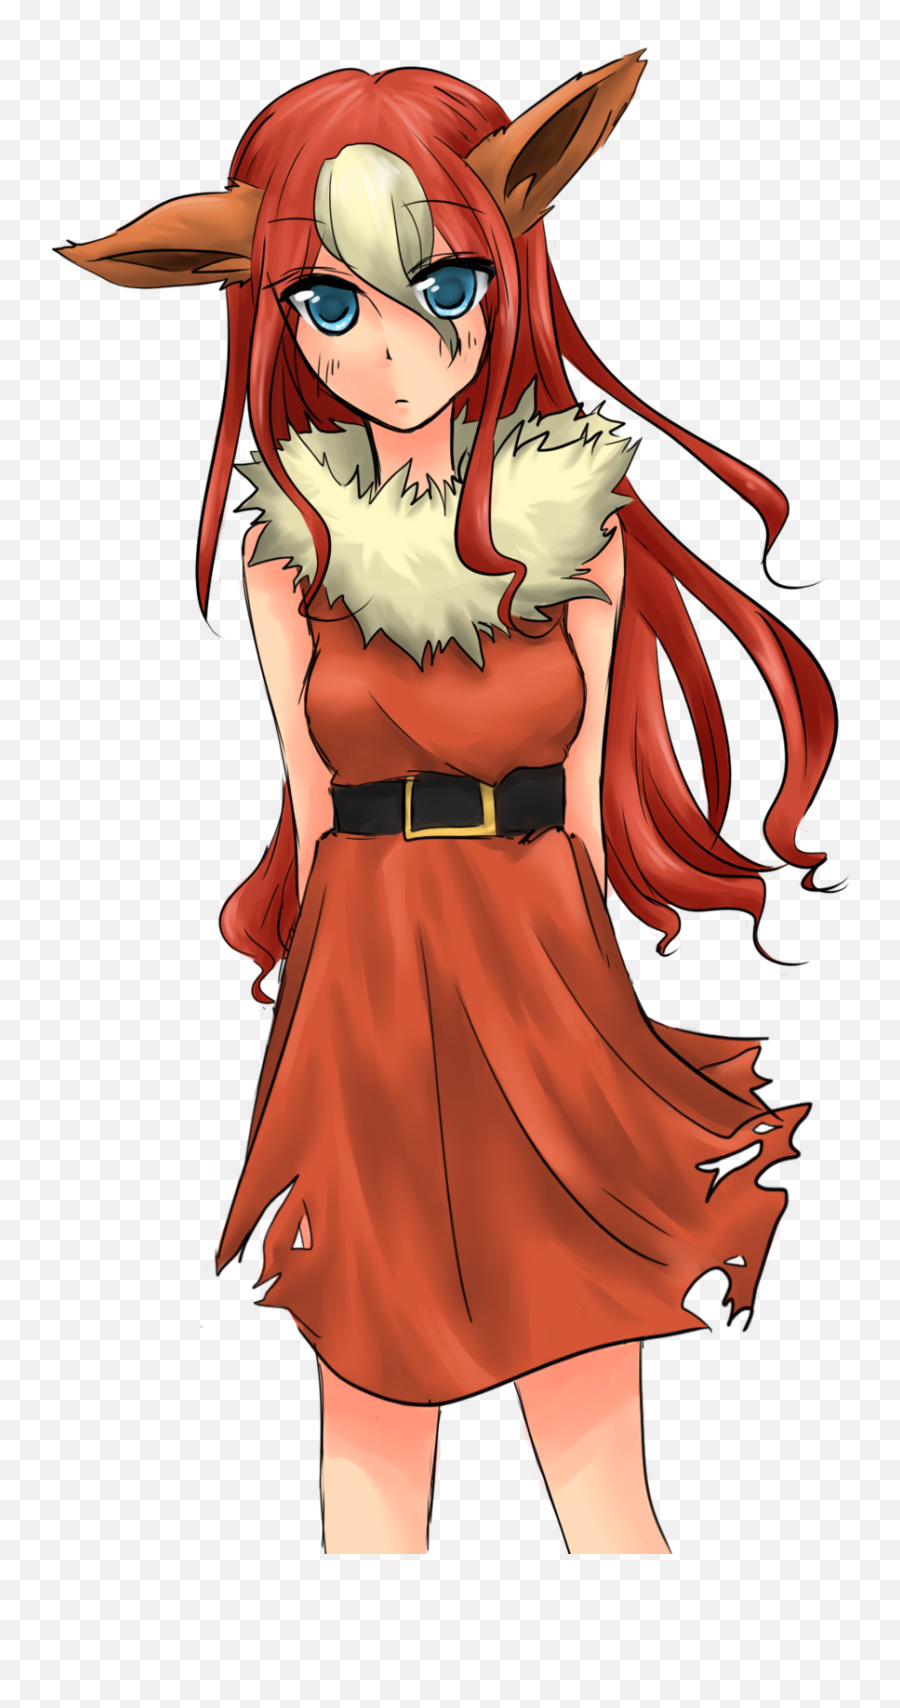 Flareon - Flareon As A Human Girl Full Size Png Download Flareon As Human Girl,Flareon Png